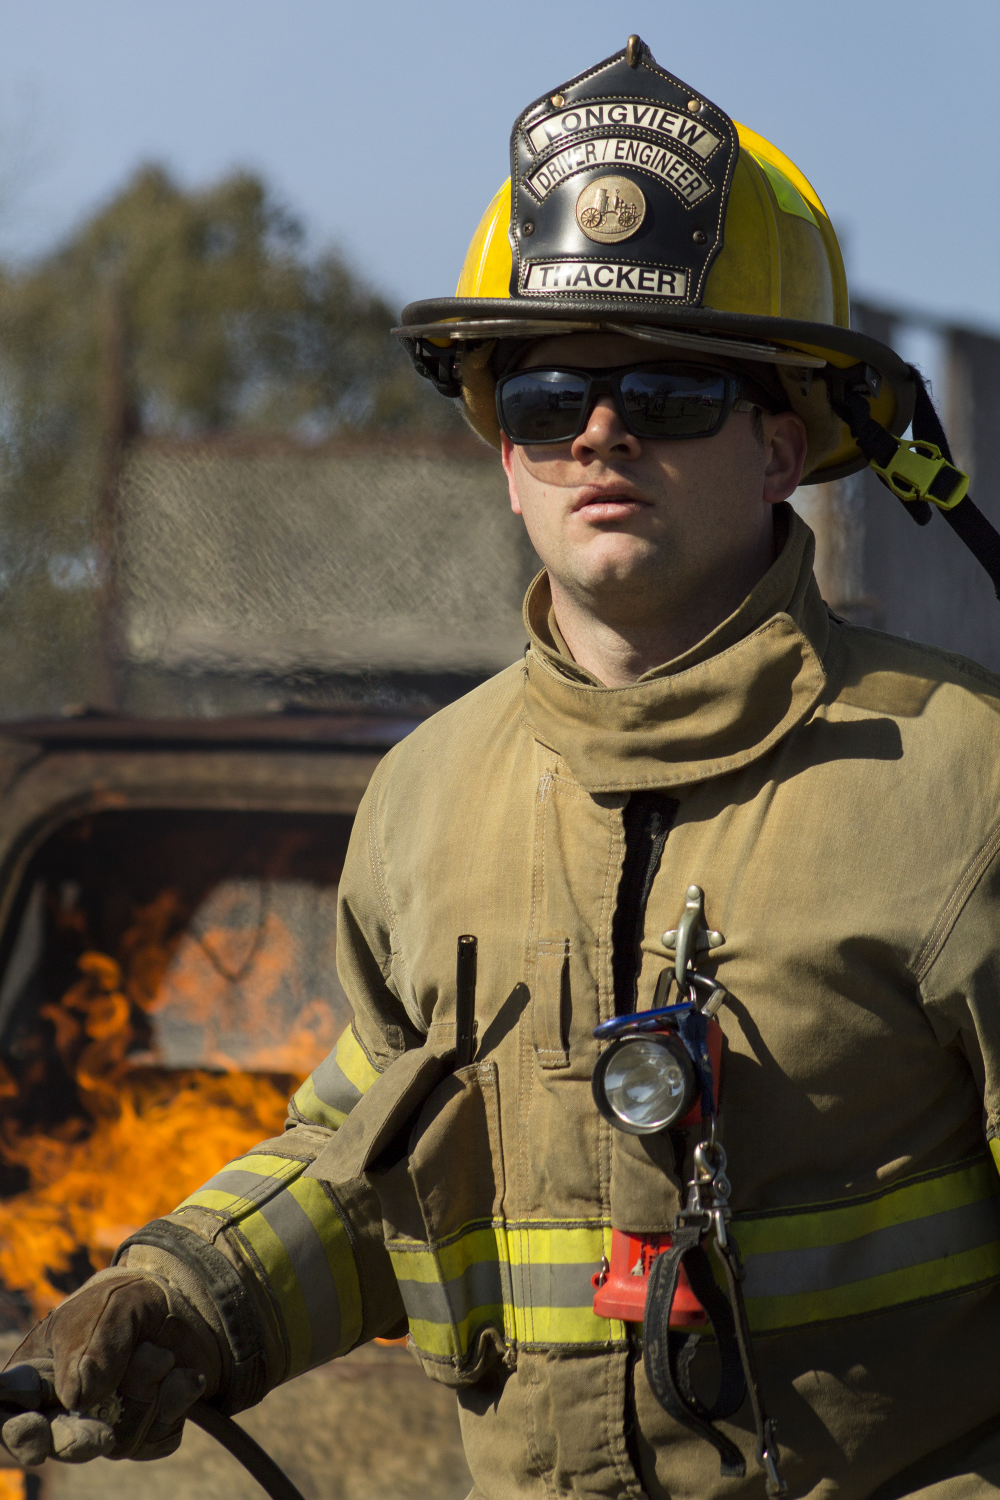 Fire Academy student training at the drill field with a car fire behind him